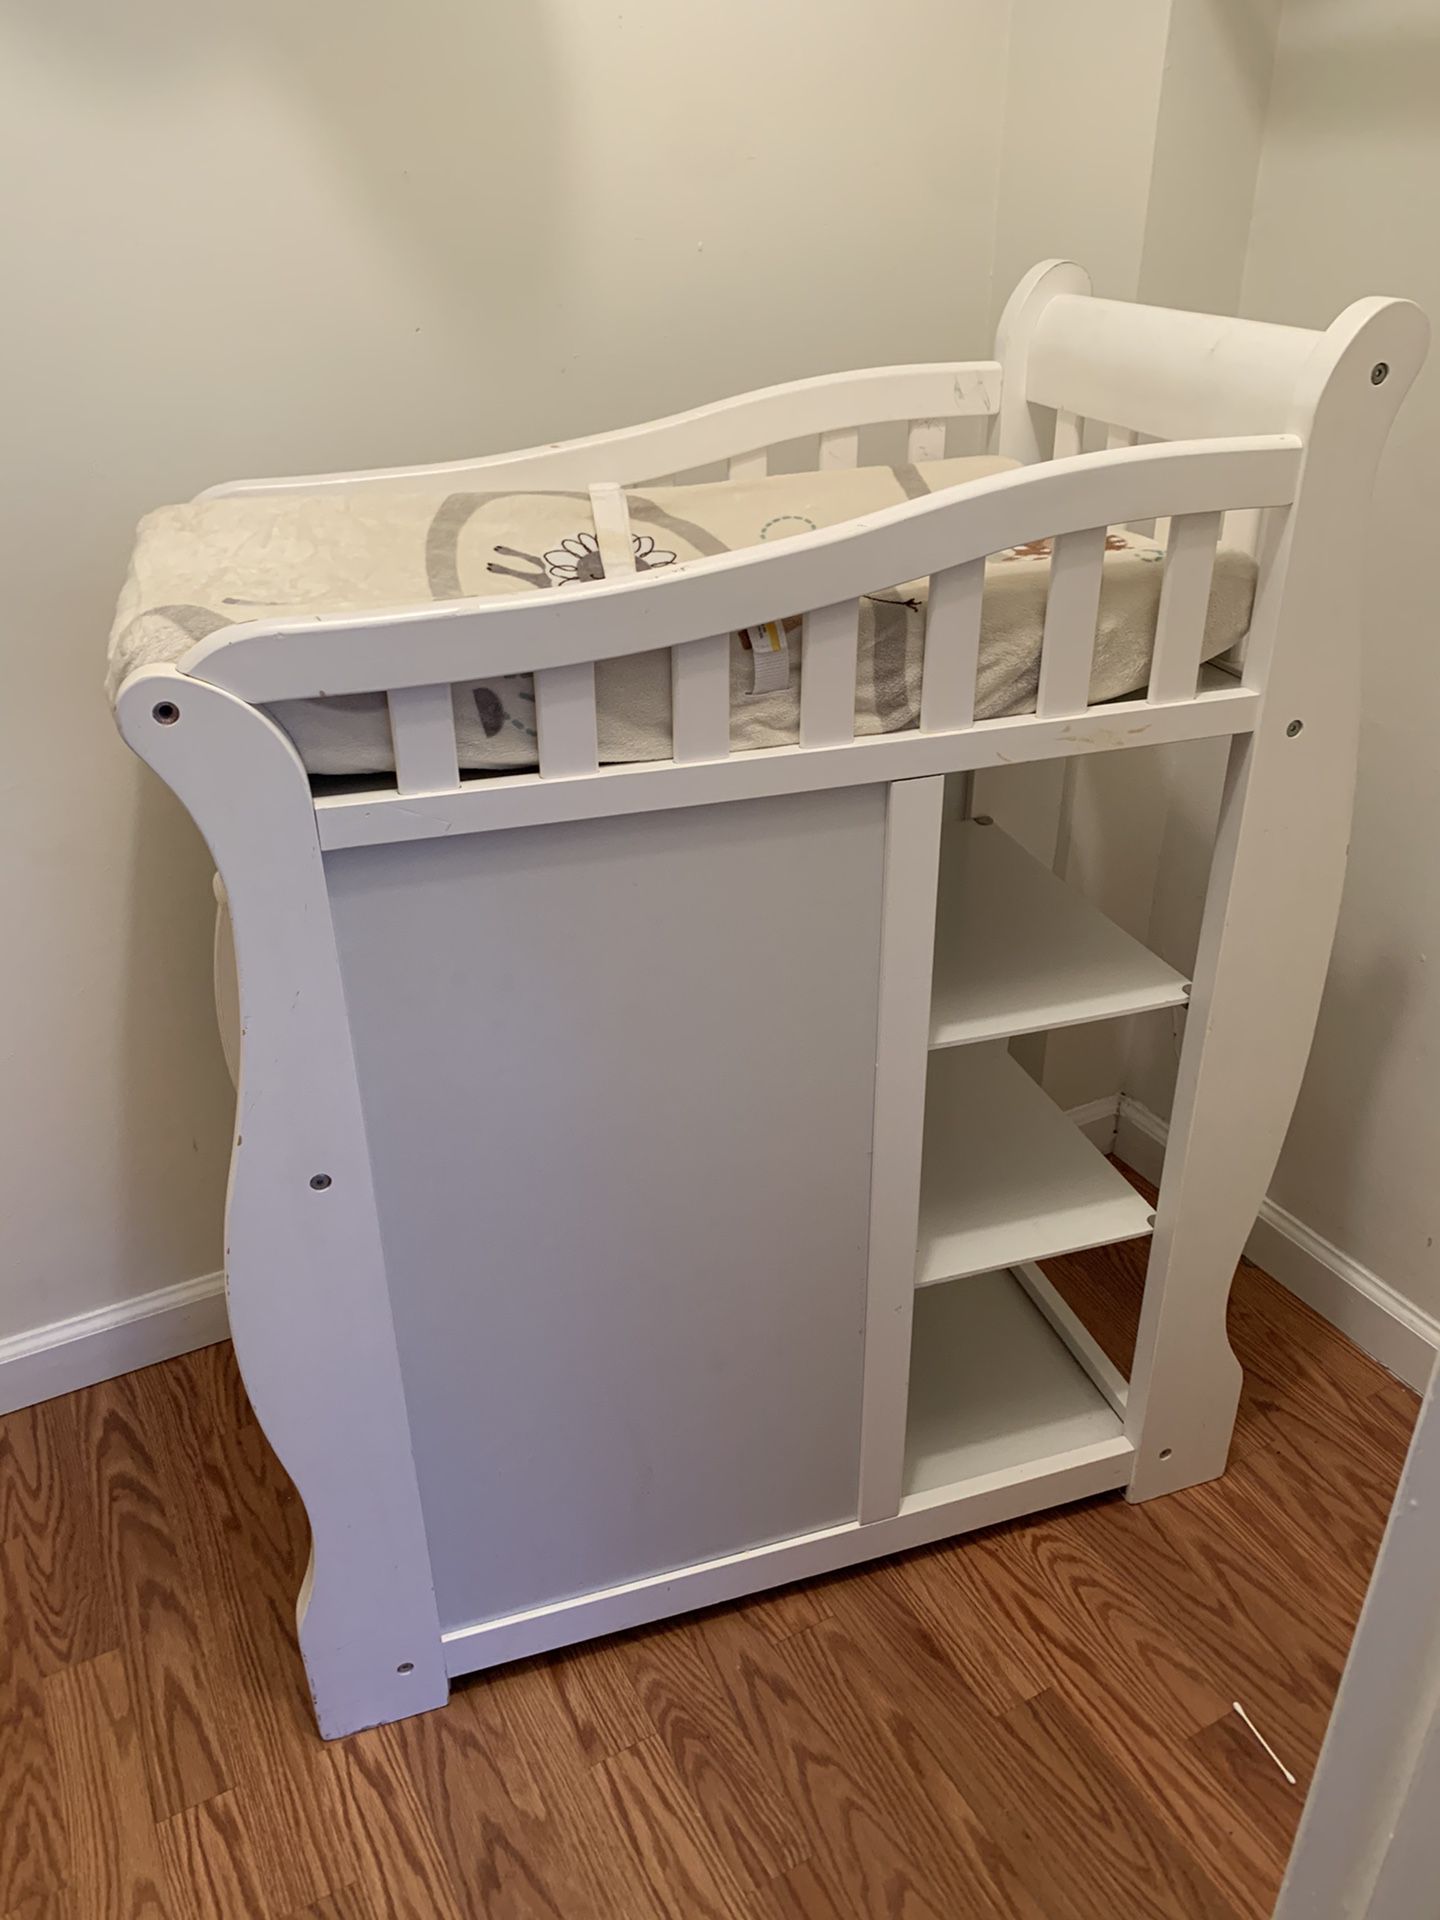 Diaper changing station with changing pad and cover